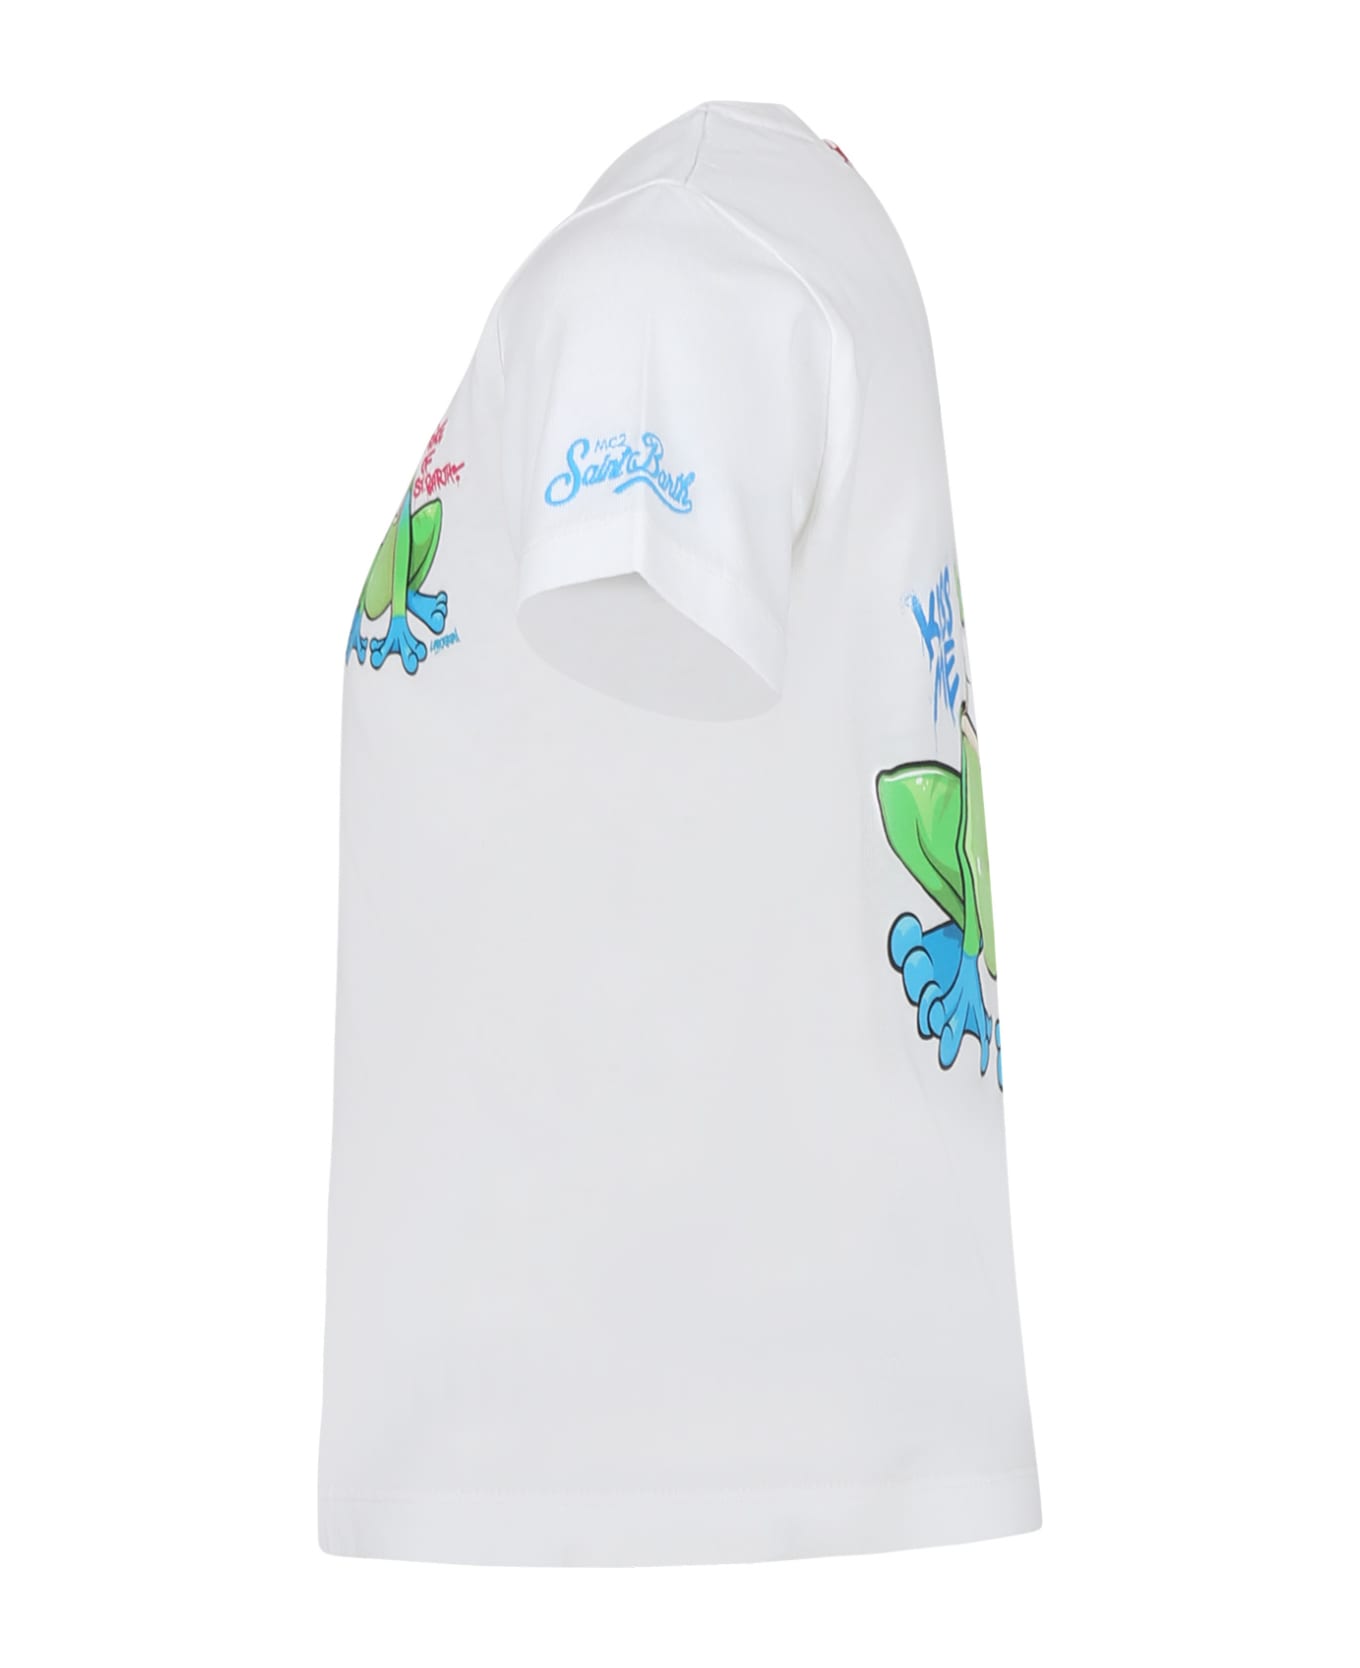 MC2 Saint Barth White T-shirt For Boy With Frog And Logo - White